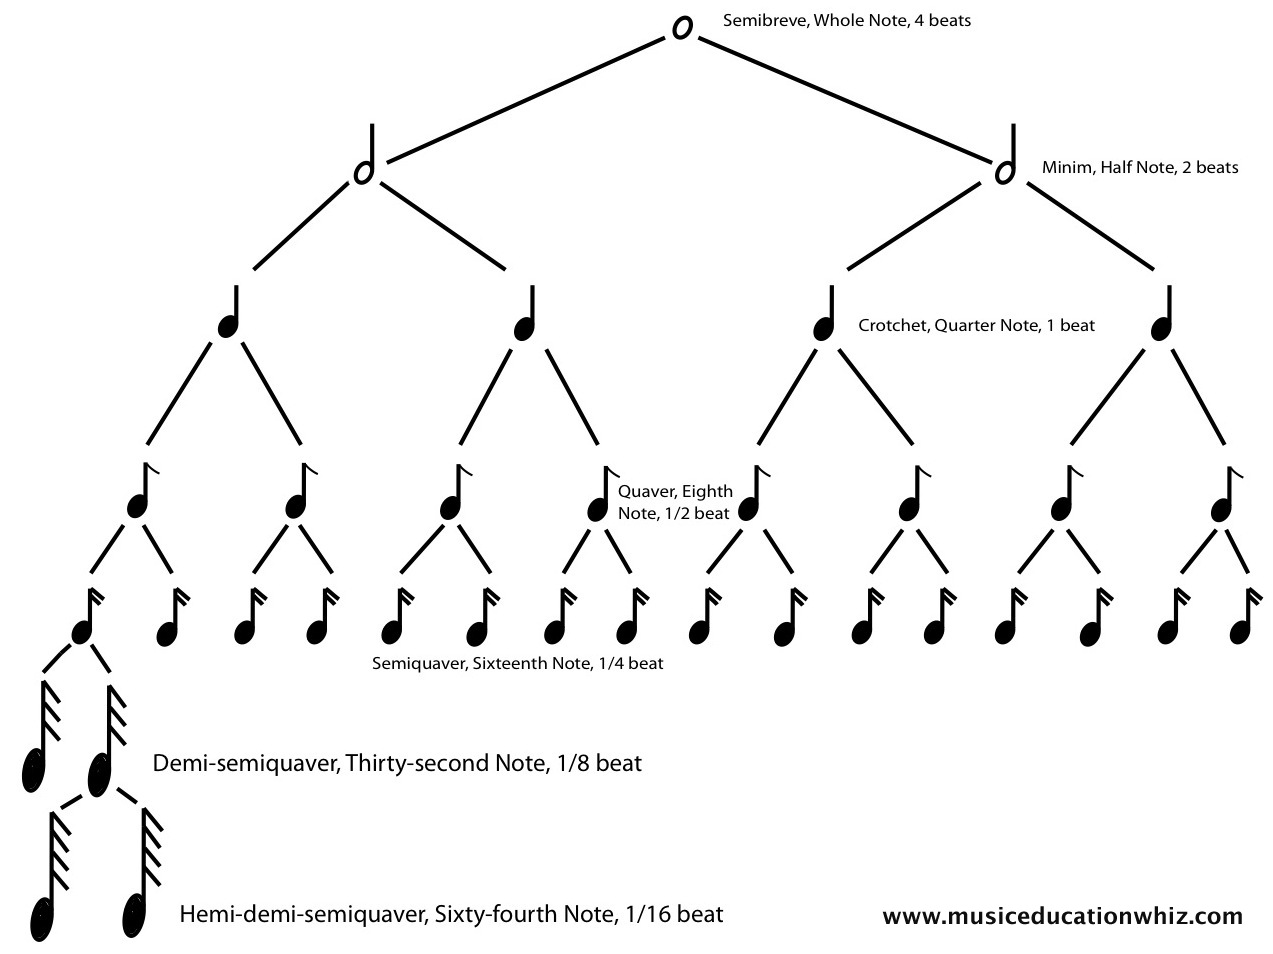 Extended rhythm tree including demisemiquavers/32nd notes, and hemidemisemiquavers/64th notes